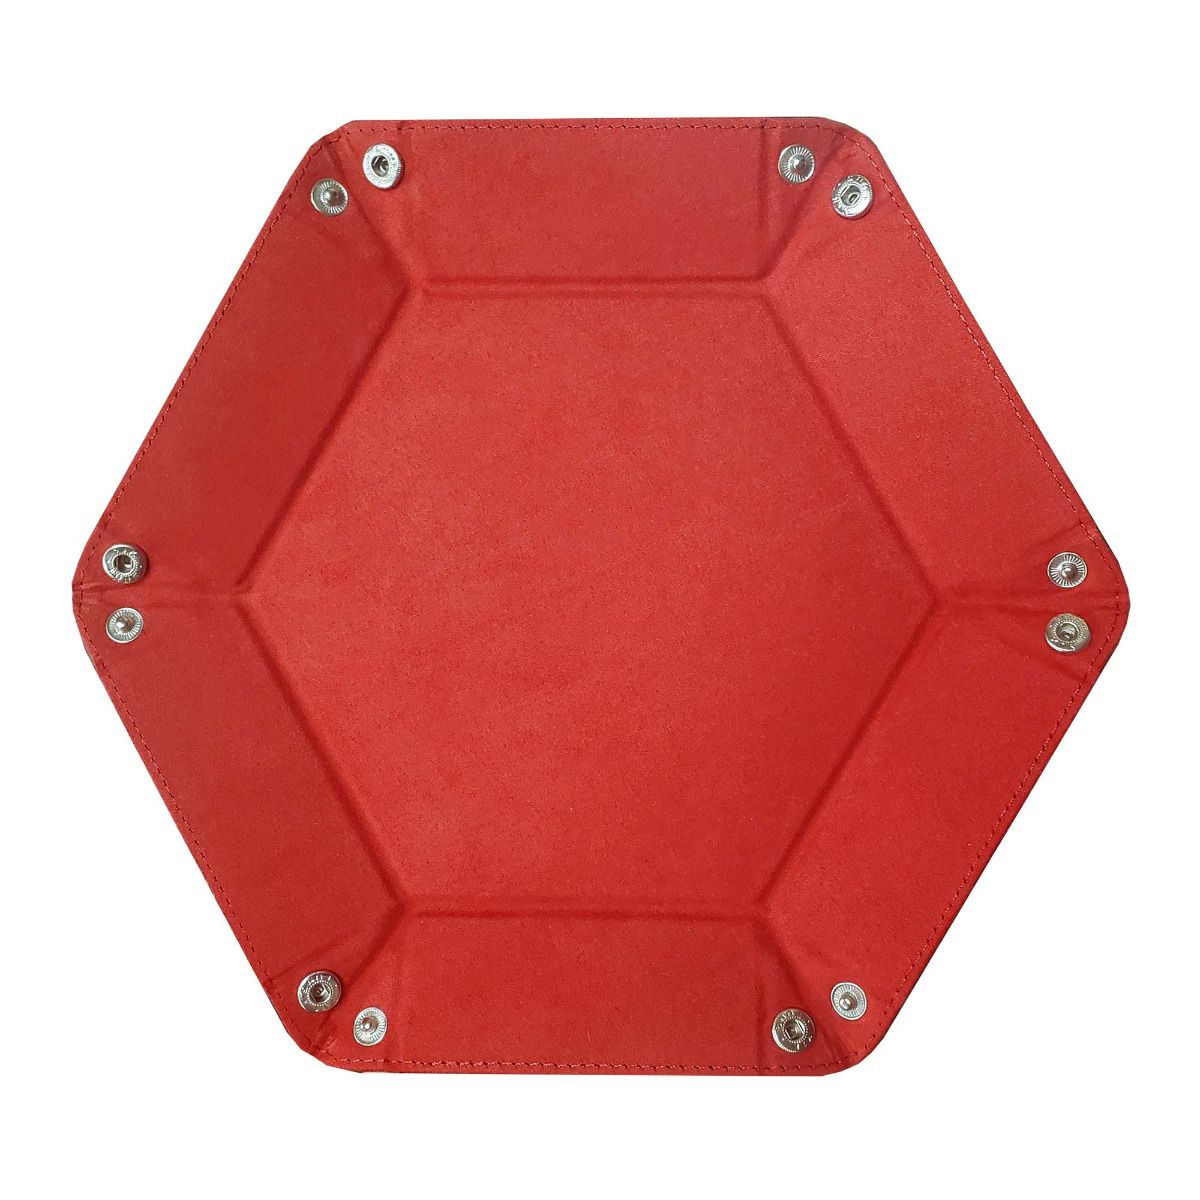 BCW Hexagon Dice Tray - Red